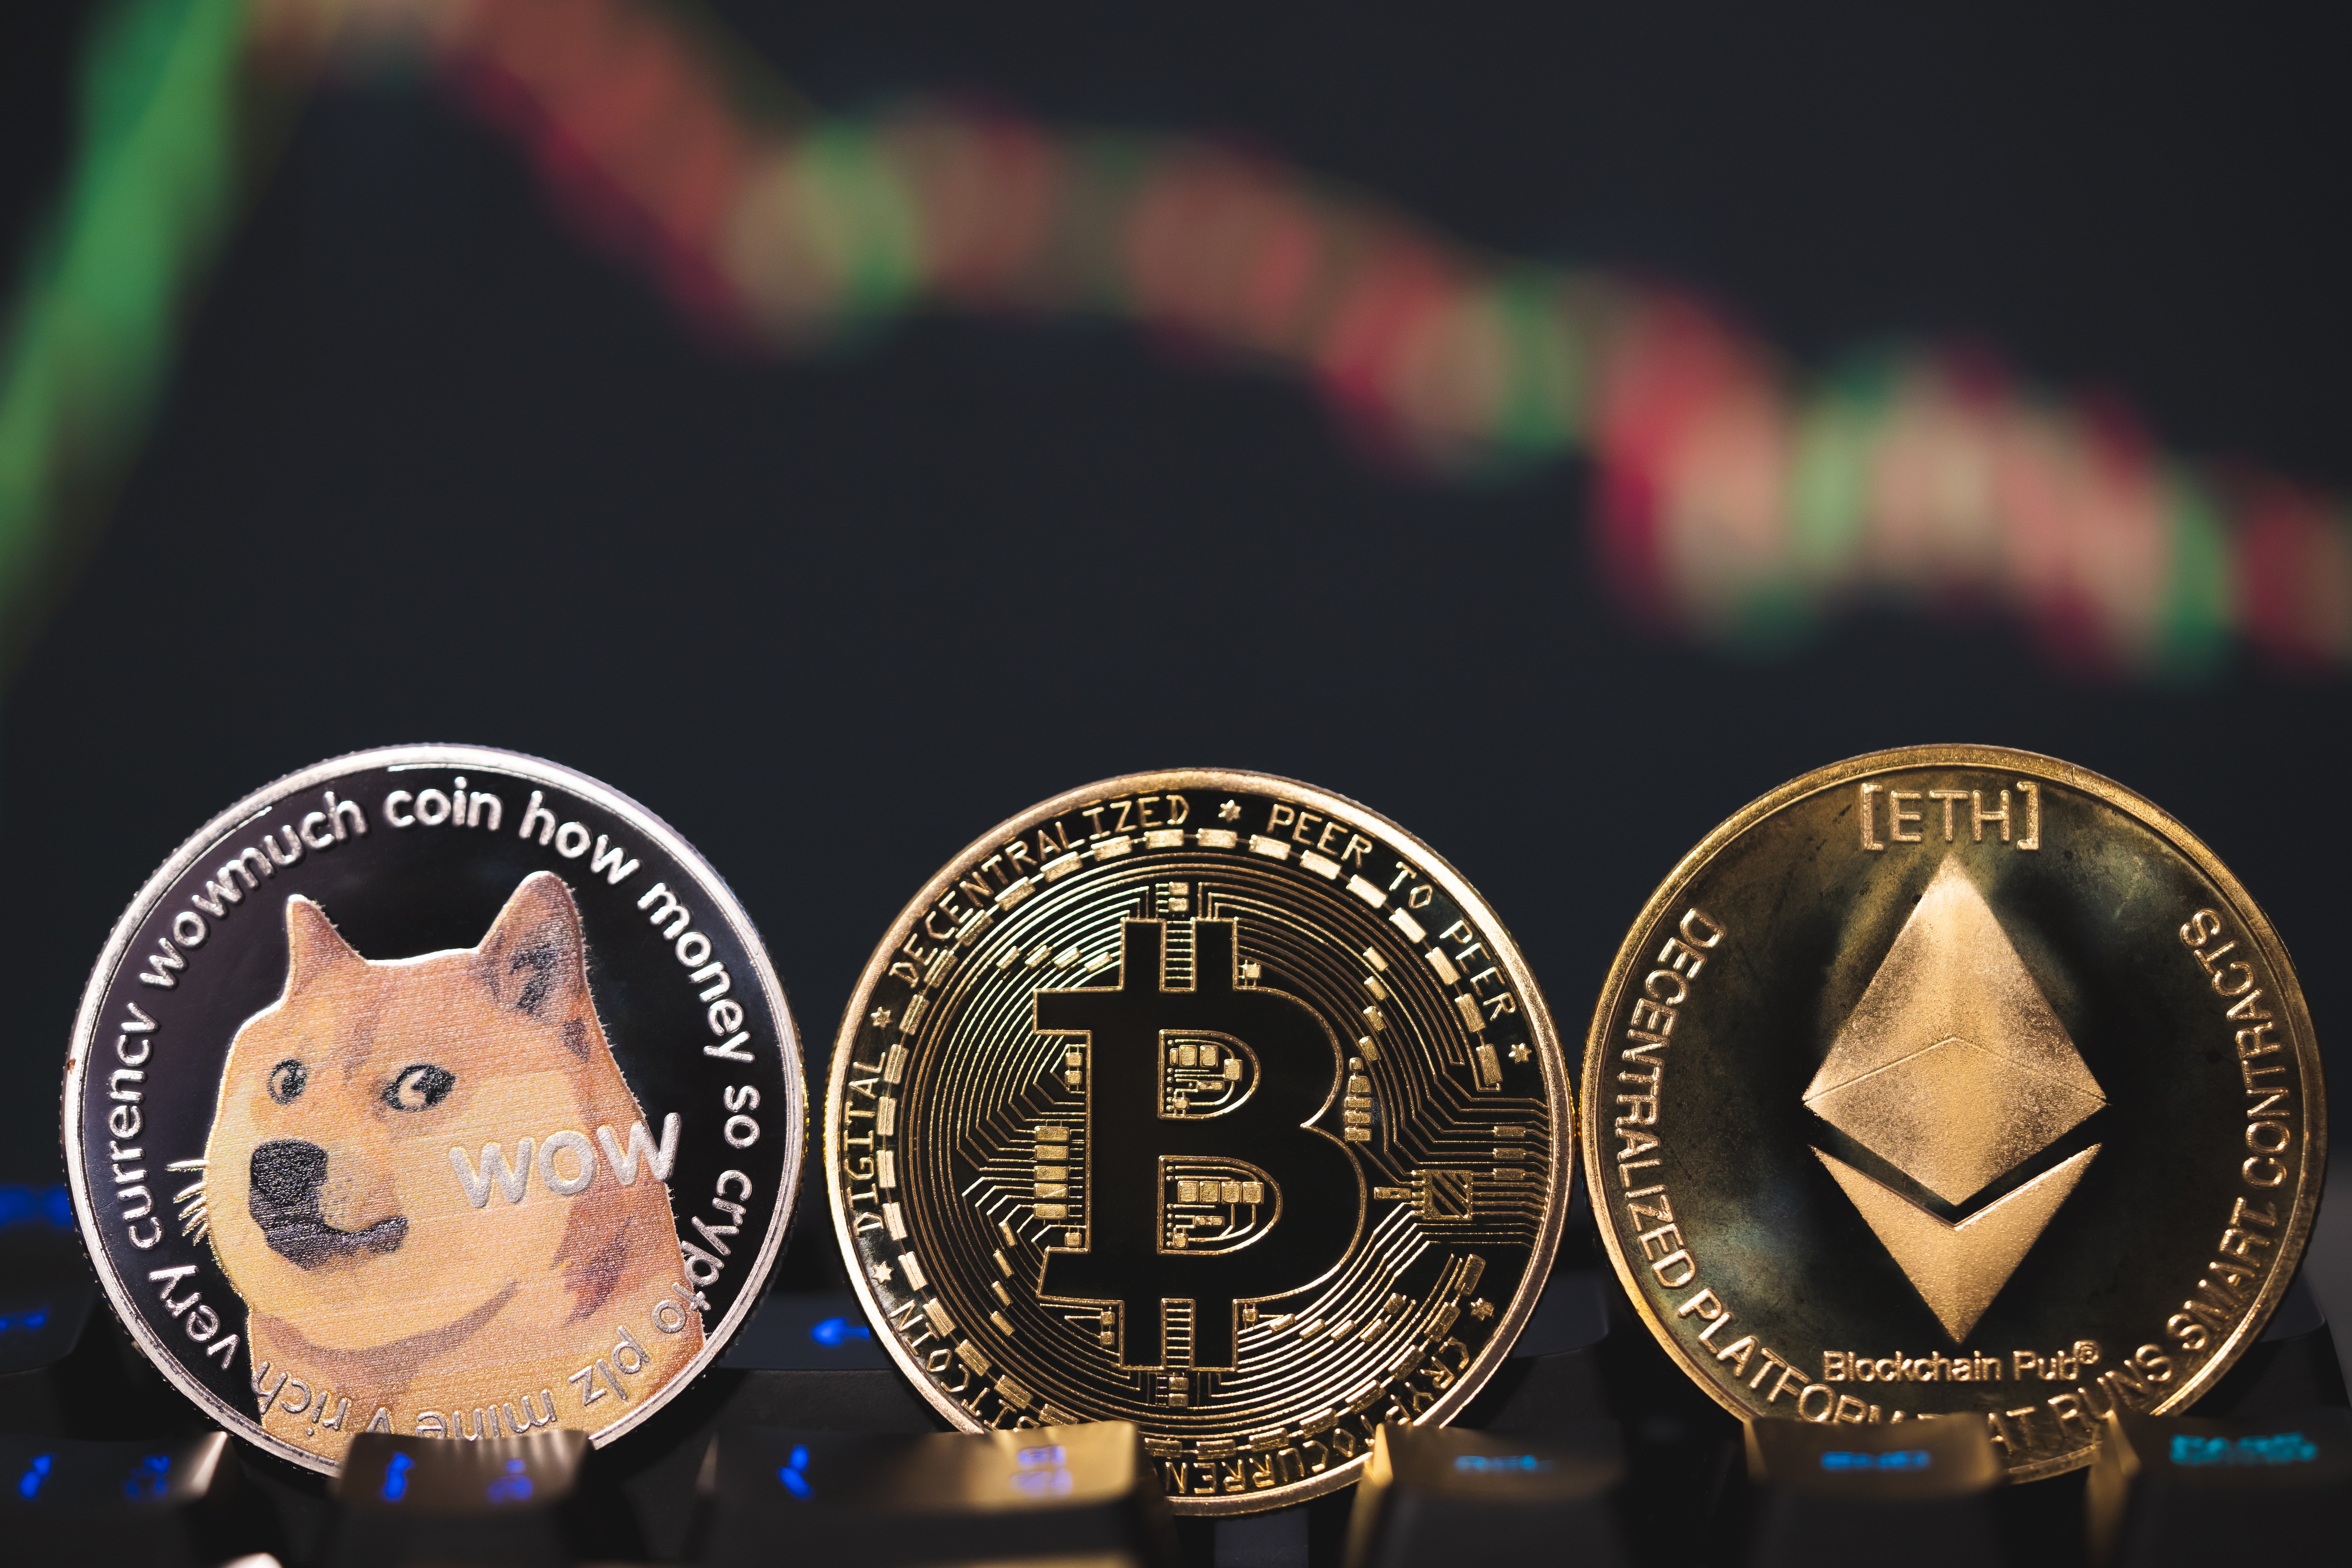 Ethereum Slides More Than Bitcoin, Dogecoin After 'The Merge:' Analyst Says 'Things Look Pretty Ugly' Right Now